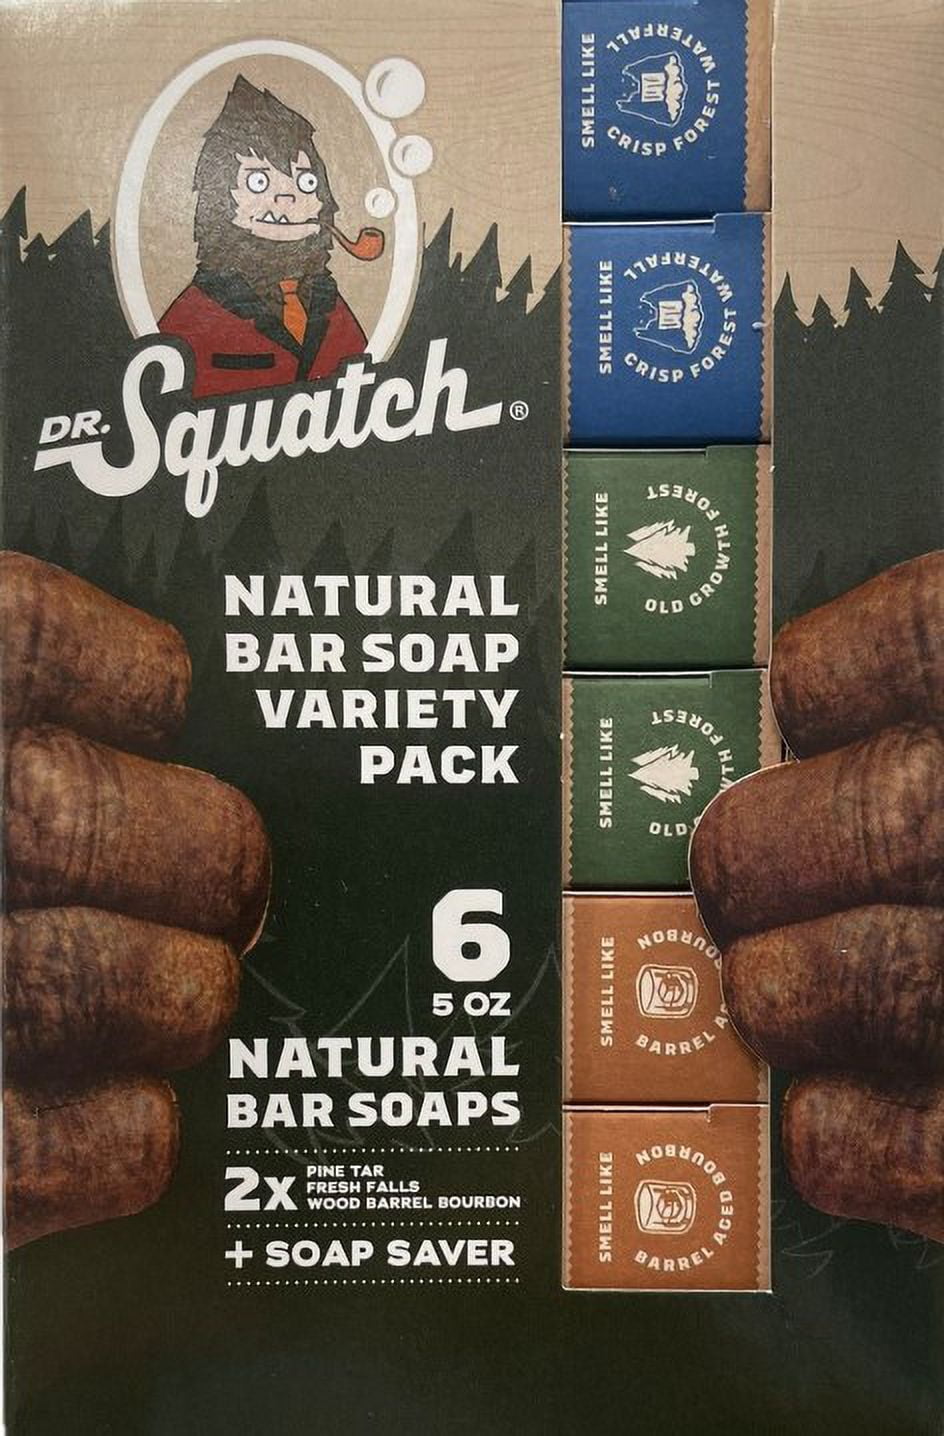 Dr. Squatch Natural Bar Soap, Variety Pack, 5 Ounce (Pack of 6), 1 unit -  Kroger